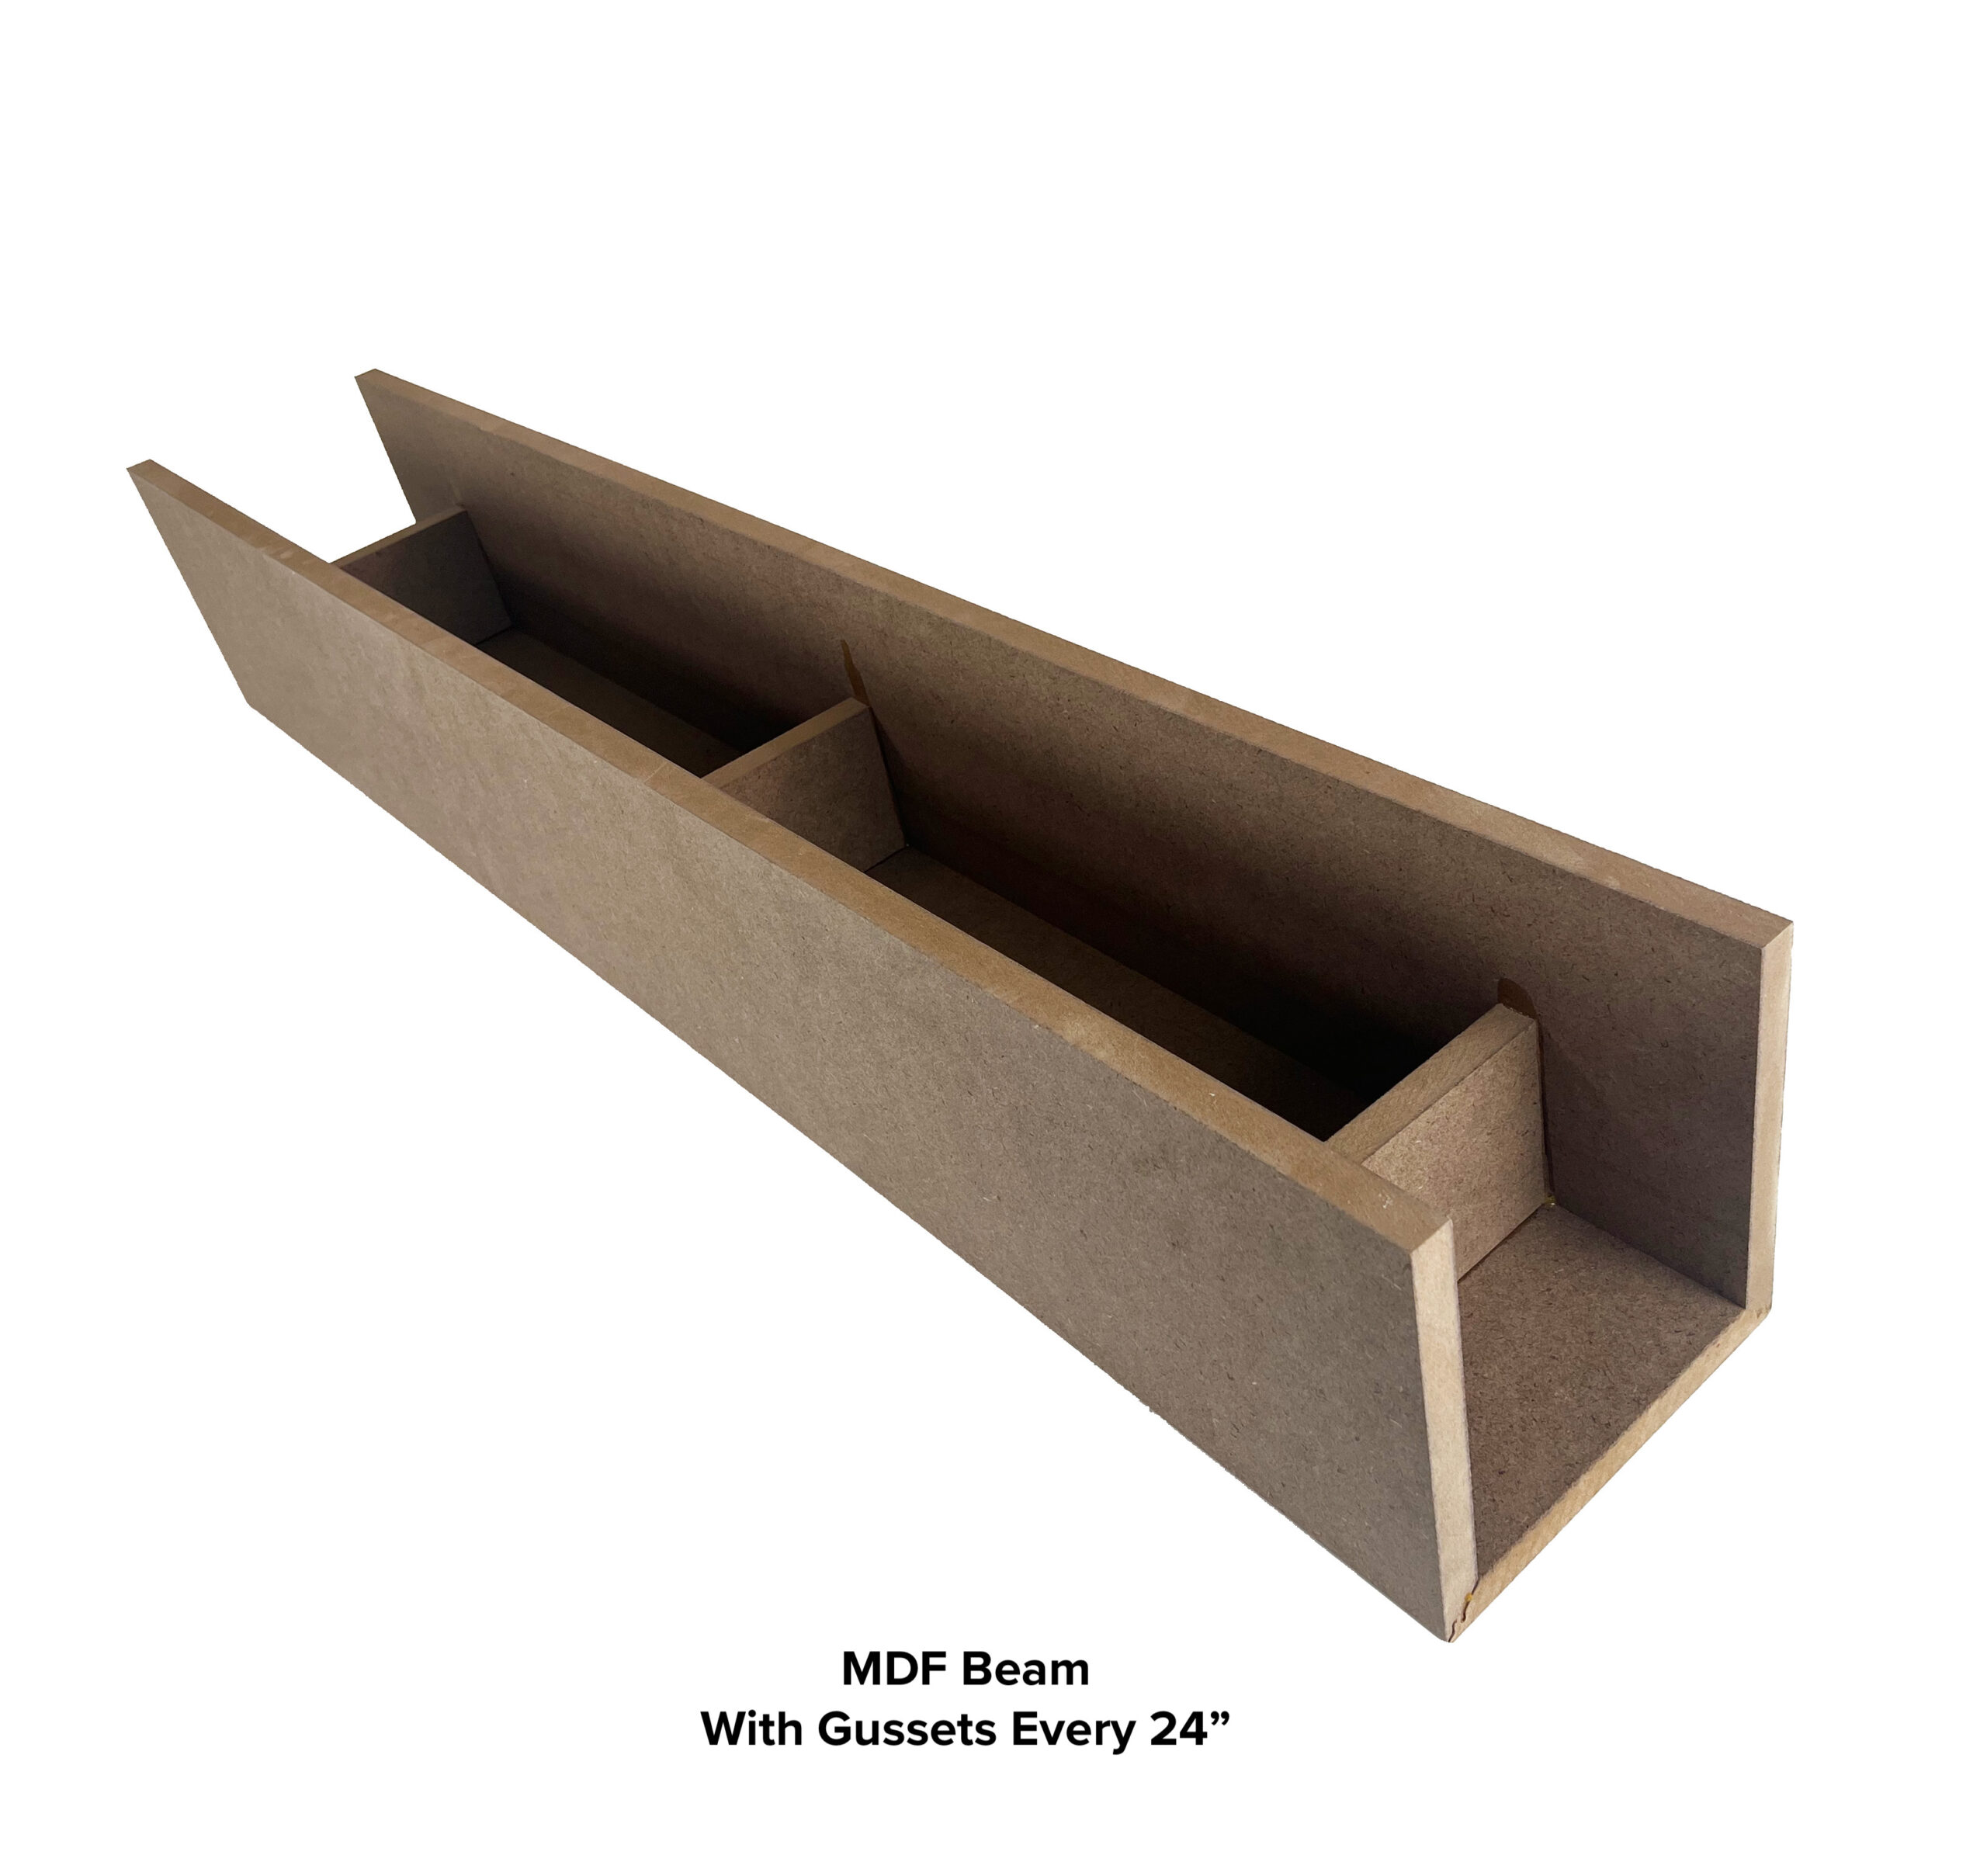 https://volterraproducts.com/wp-content/uploads/2023/03/MDF-wood-beam-inside-labeled-scaled.jpeg